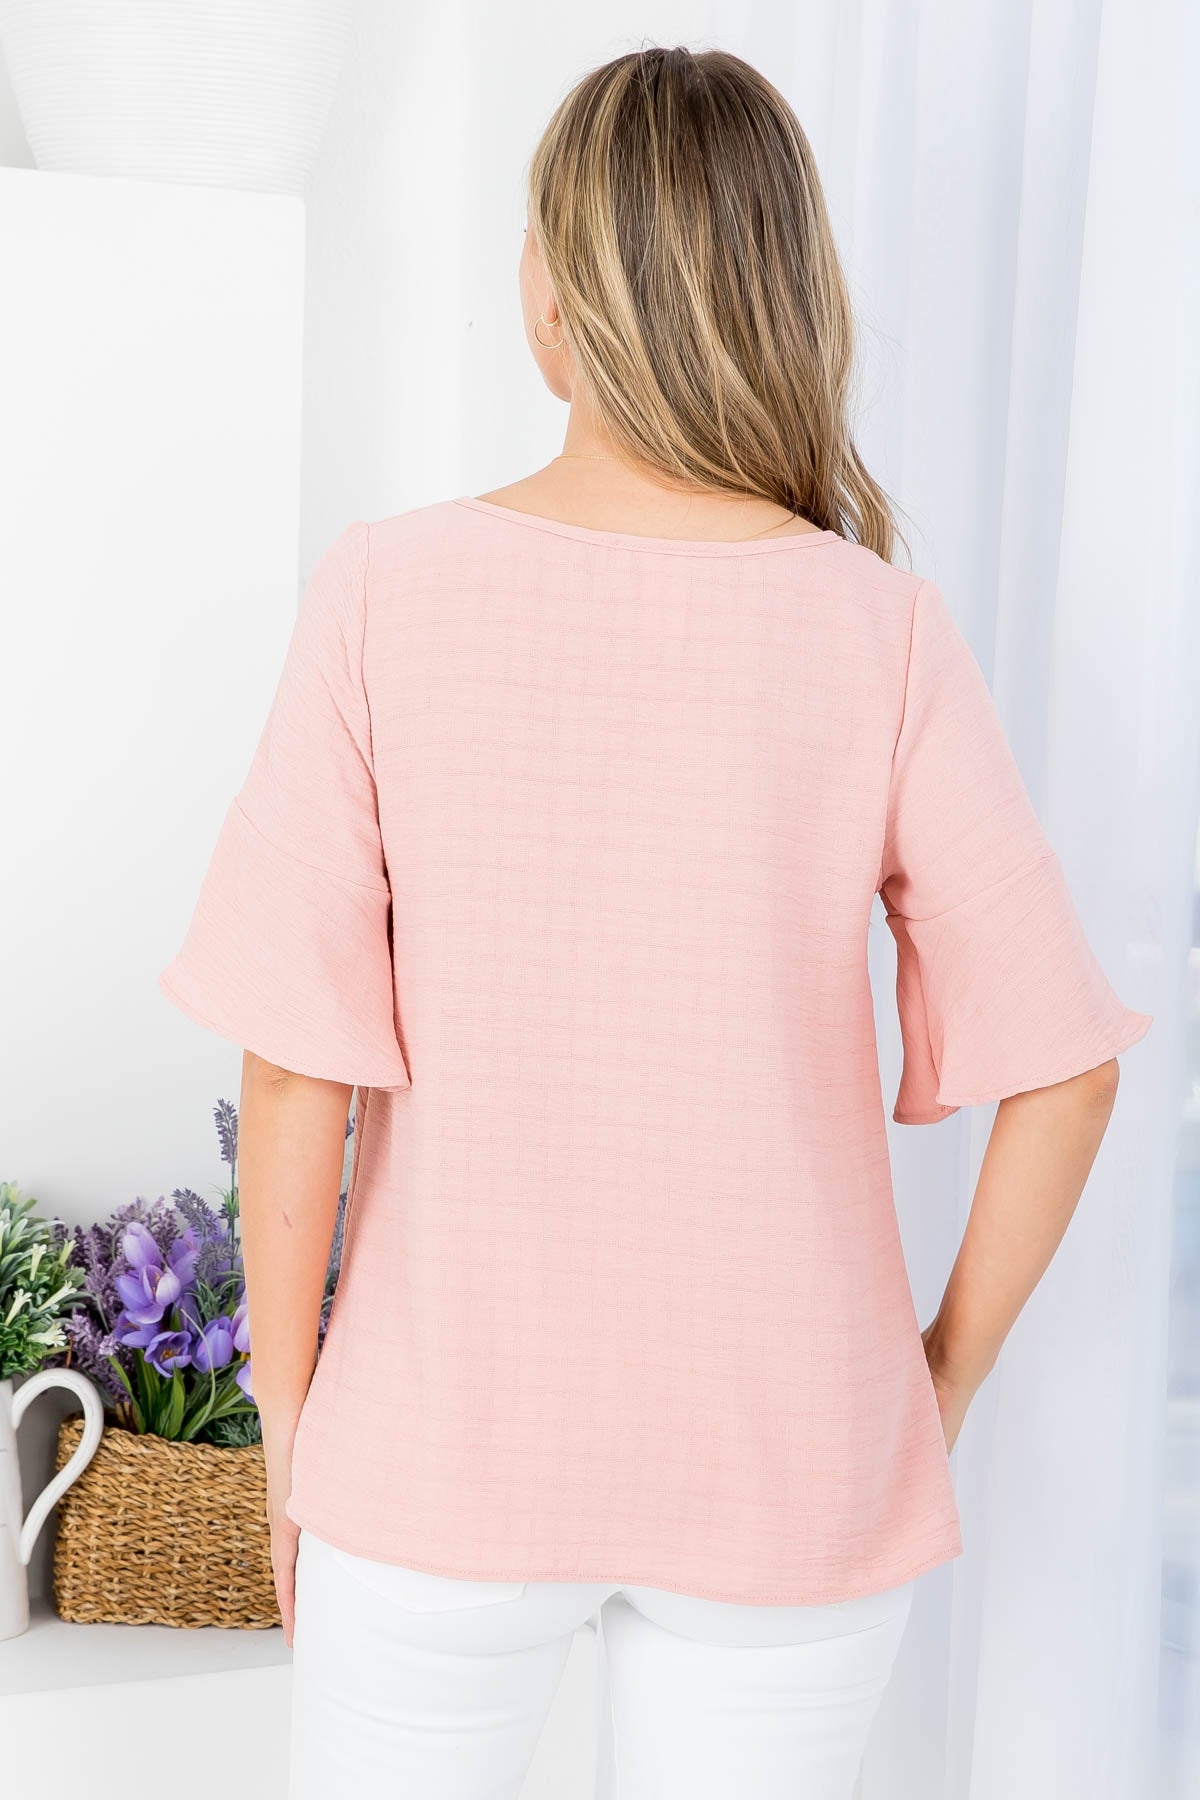 MAUVE ROUND NECKLINE WITH FRONT TIE BELL SHORT SLEEVE TOP